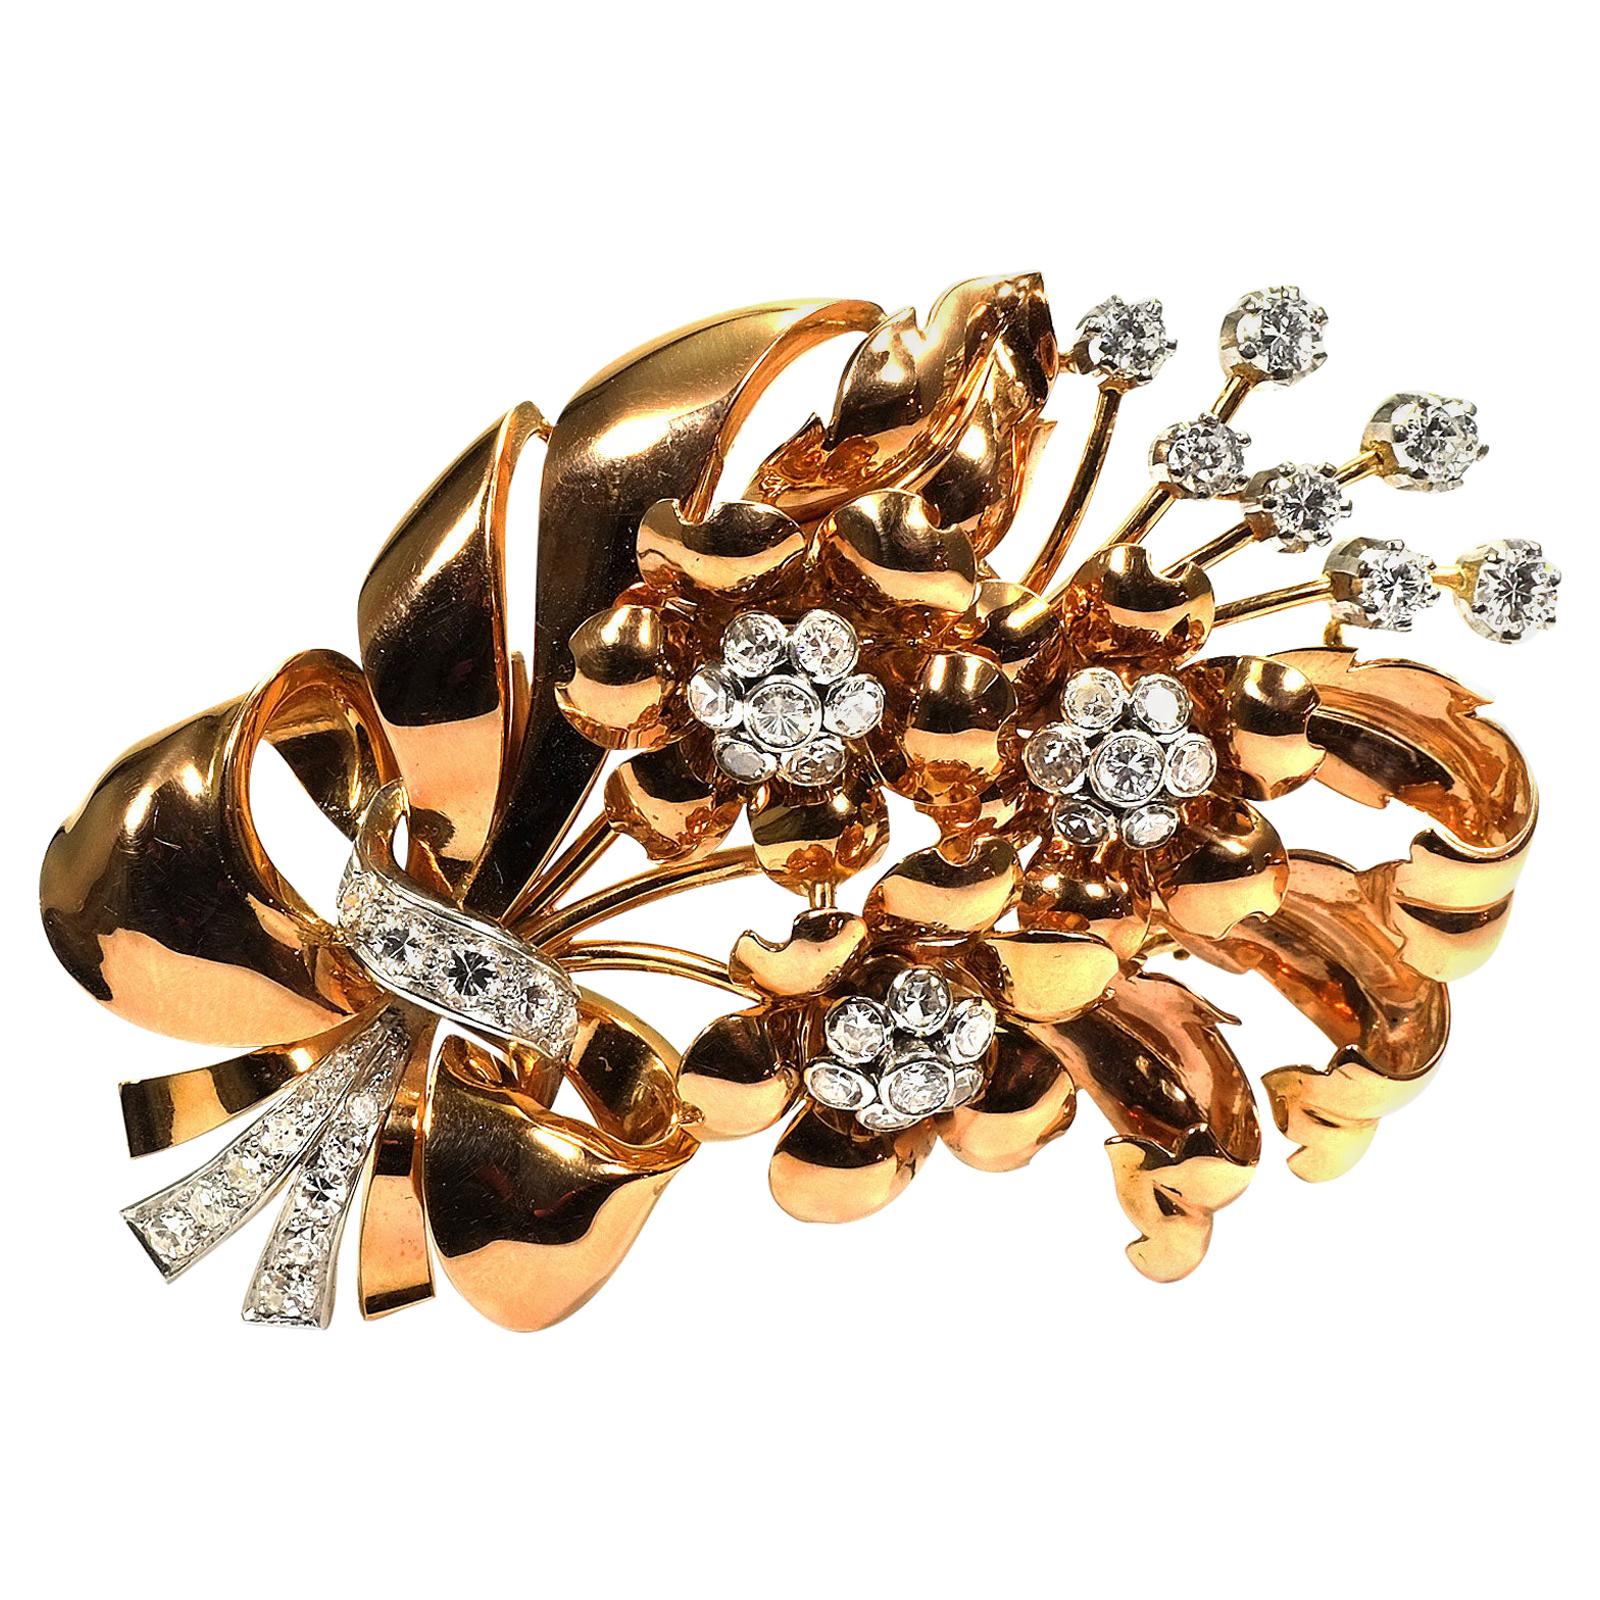 Retro 2.5 Carat Diamond and Rose Gold Flower Bouquet Brooch, circa 1945 For Sale